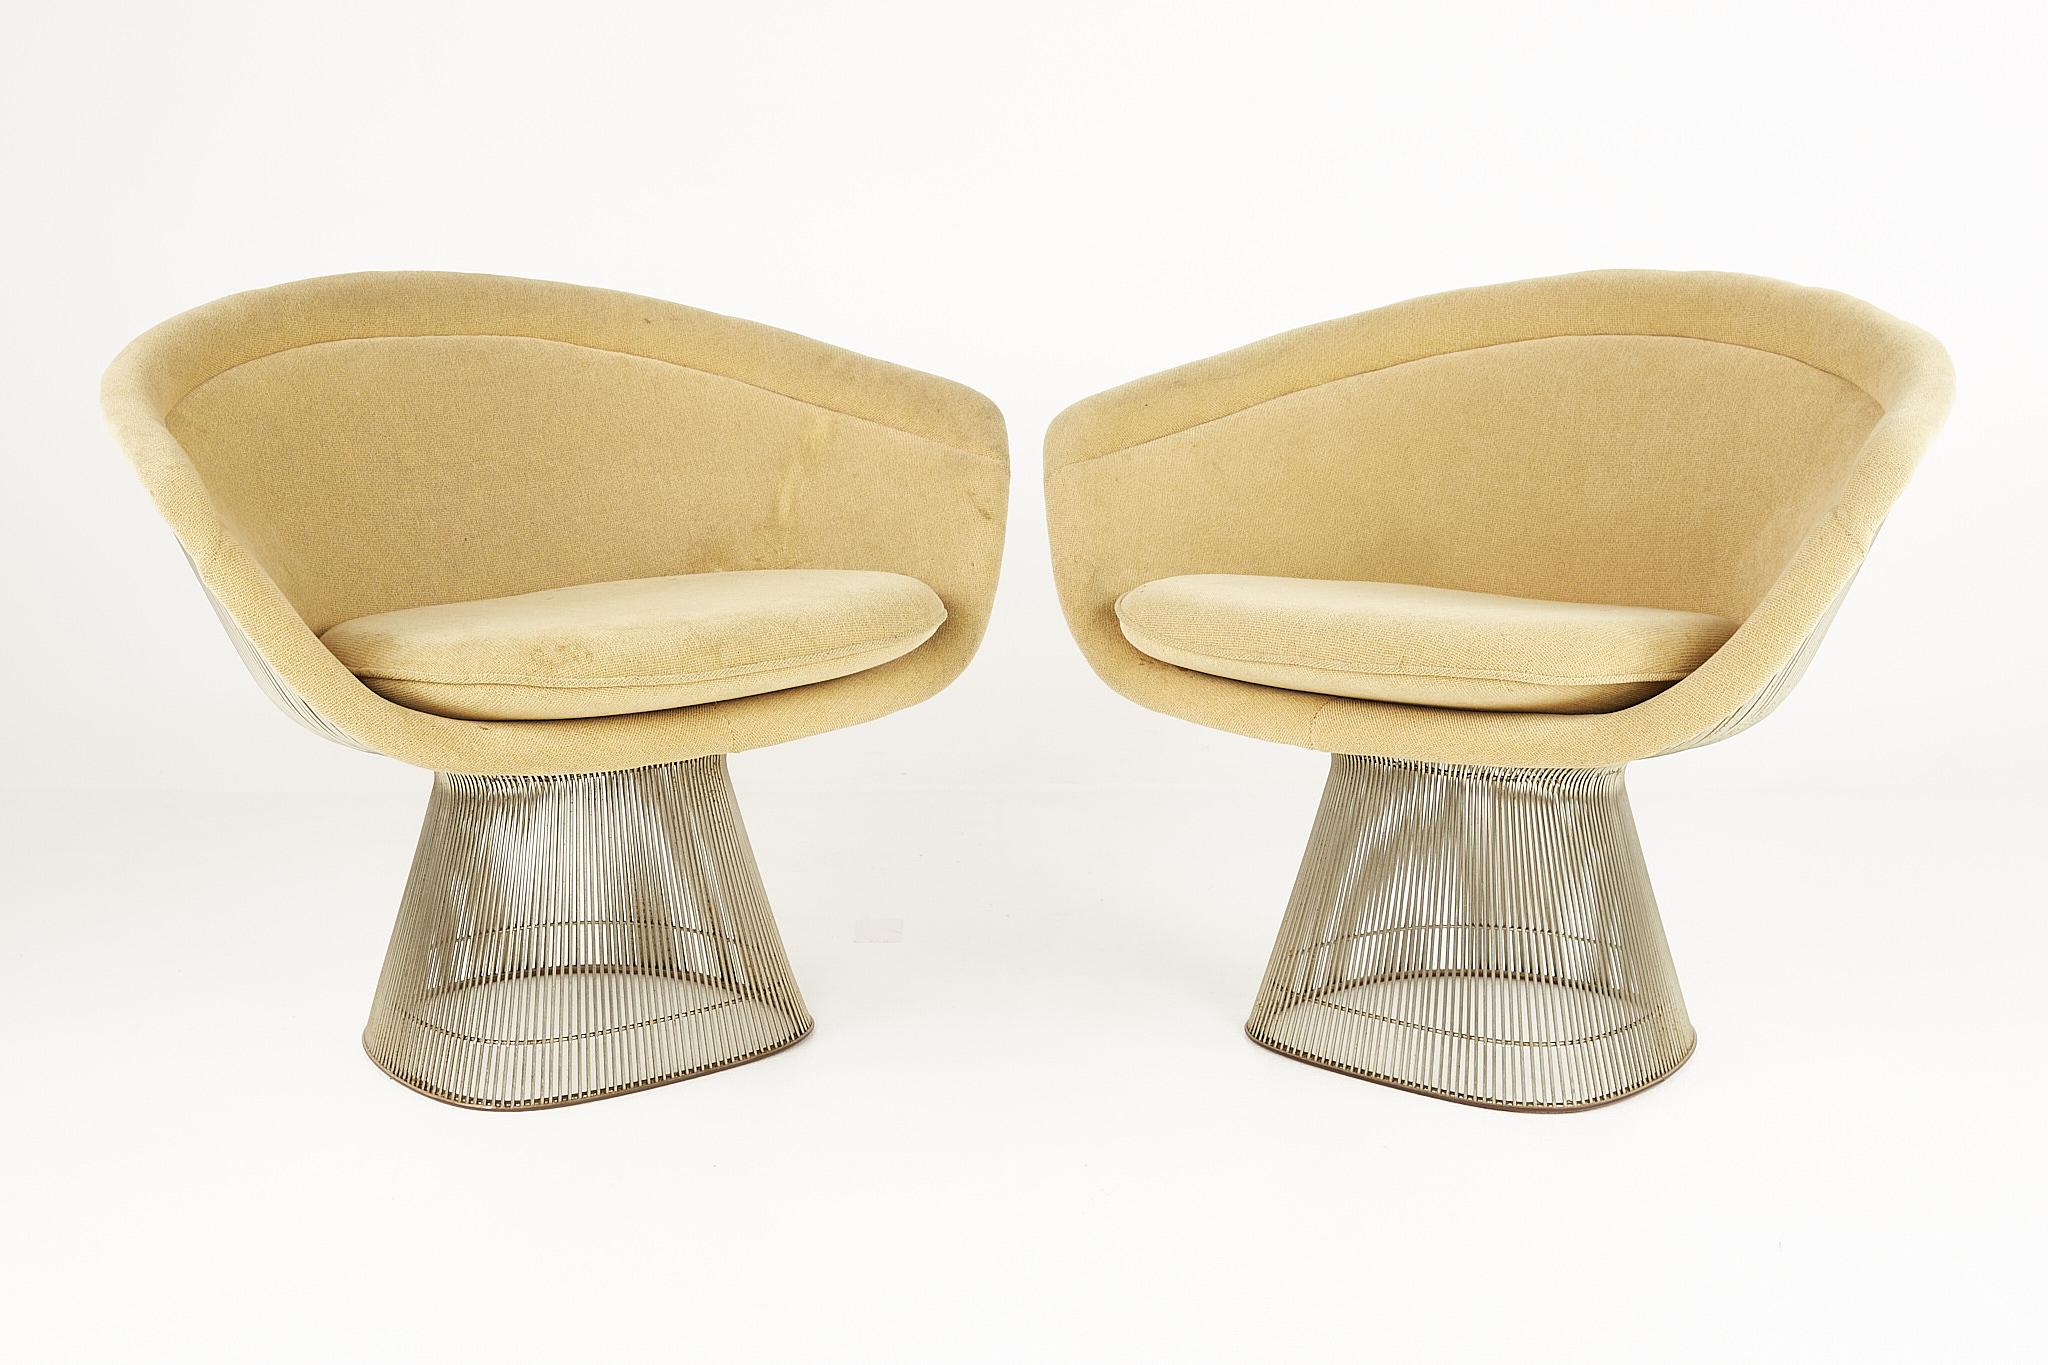 Warren Platner for Knoll mid century lounge chairs - pair

These chairs measure: 36.5 wide x 26 deep x 30.25 inches high, with a seat height of 18.5 and arm height of 25 inches

All pieces of furniture can be had in what we call restored vintage